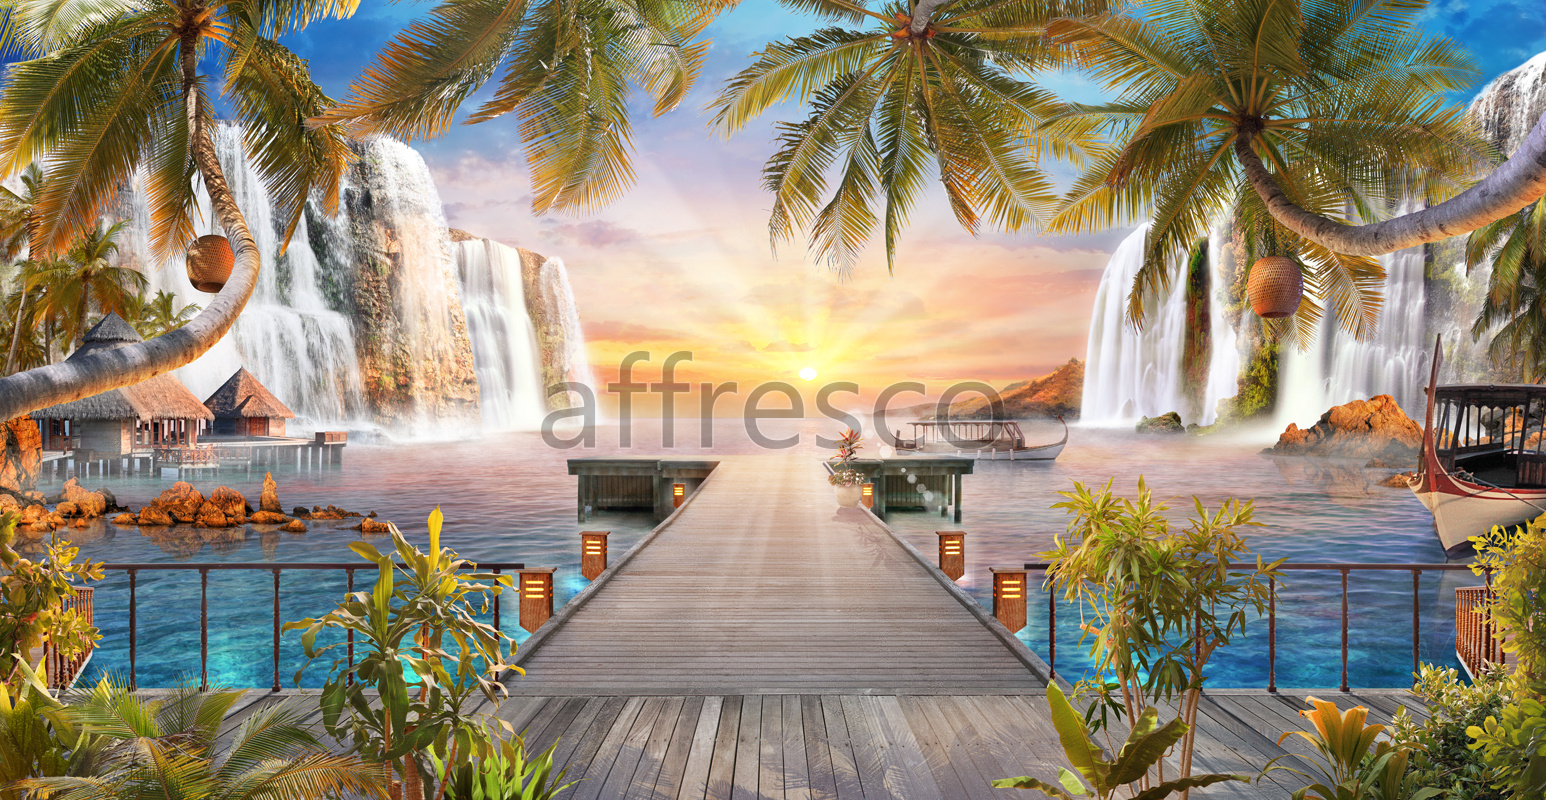 6411 | The best landscapes | Waterfall view from a pier | Affresco Factory